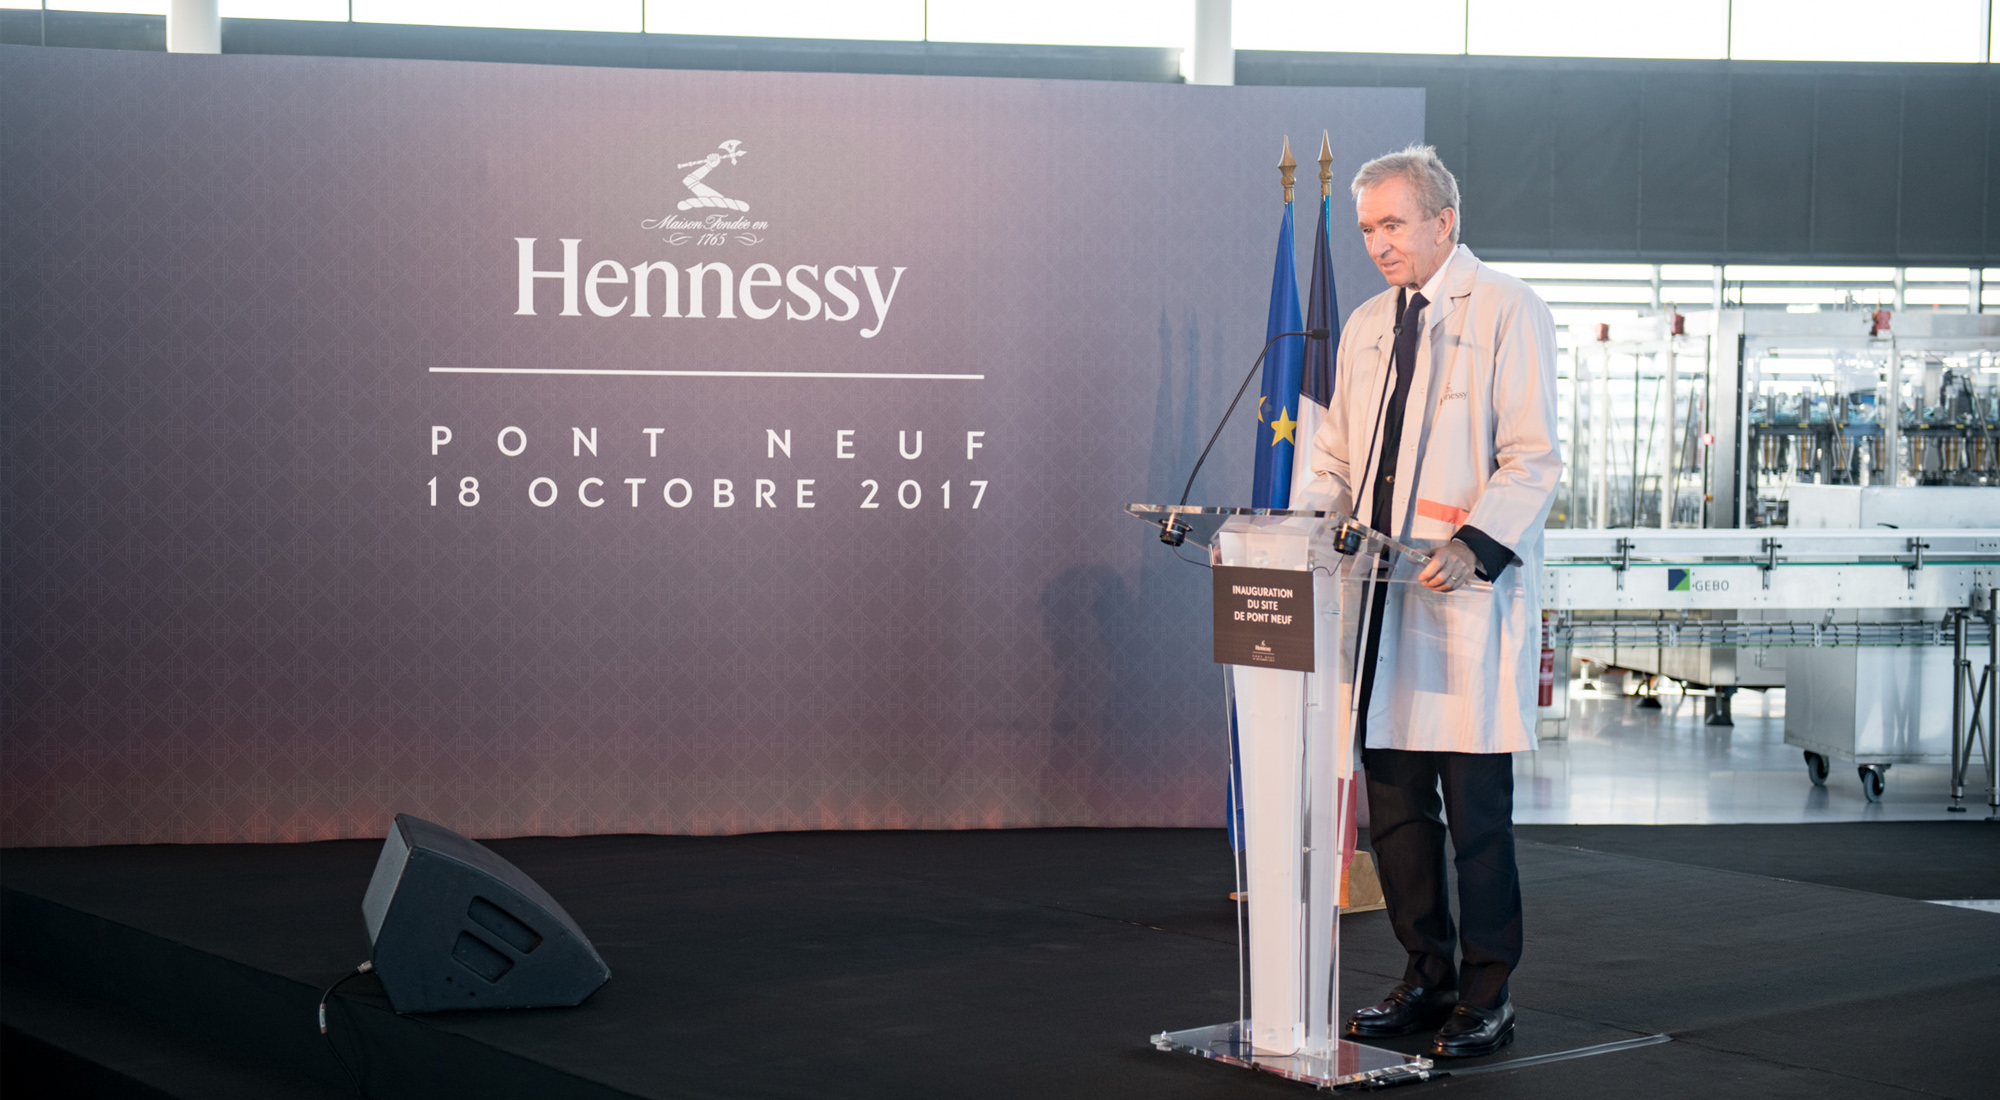 Highlights from inauguration of Hennessy Pont Neuf site - LVMH